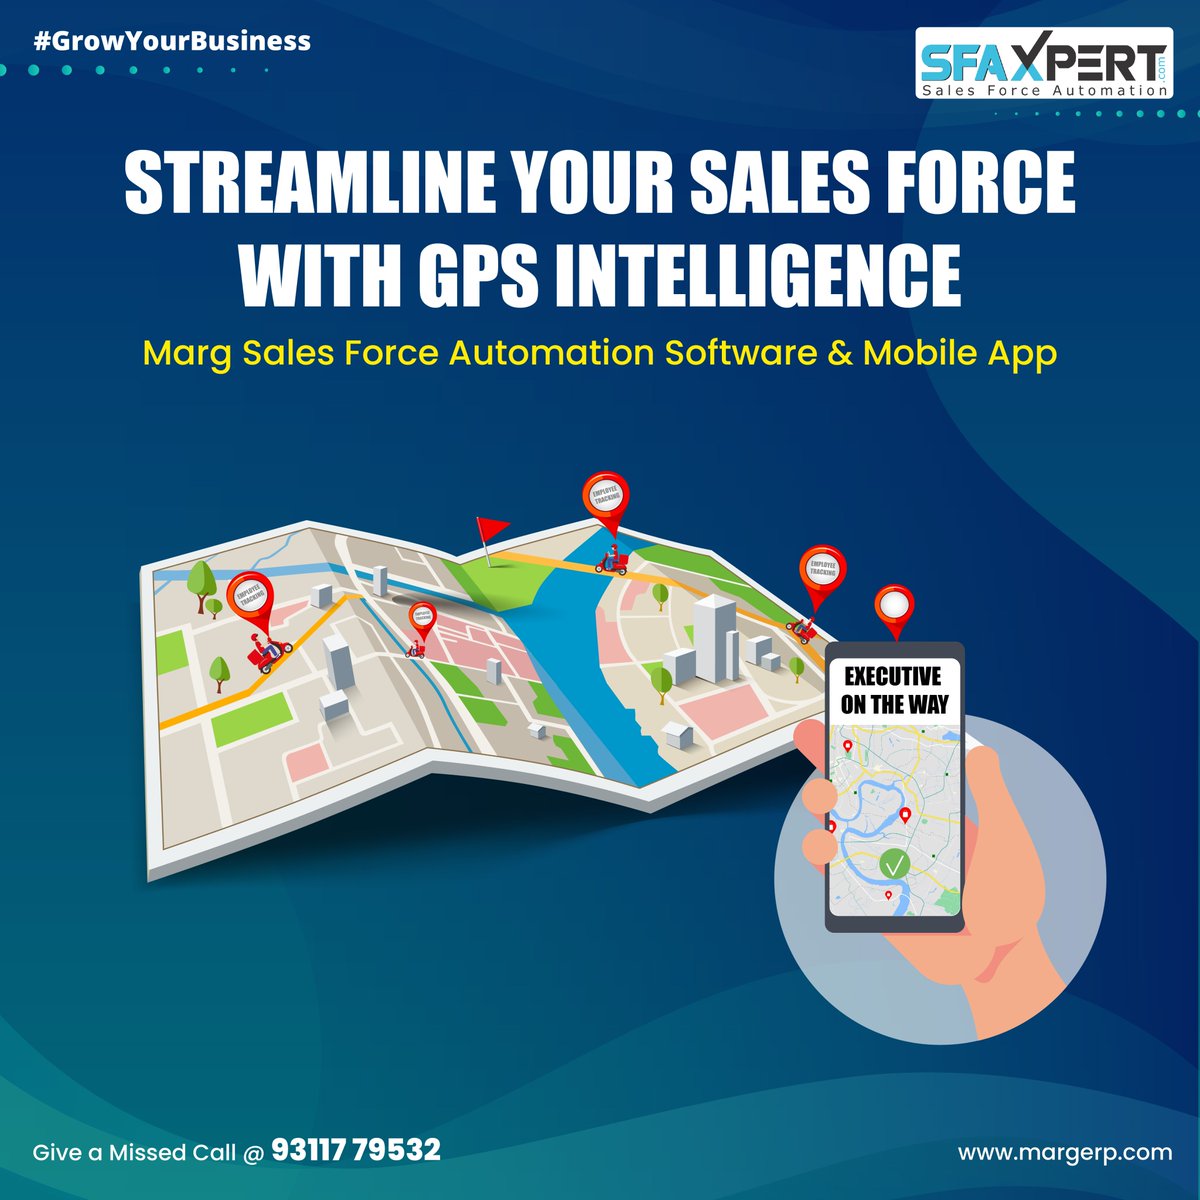 Track your sales force via GPS in real-time. Stay updated and grow your business with speed.

Get Marg SFAXpert today!
📞For Free Demo call us at 9311779532

#Marg #MargERP #MargGroup #SFAXpert #GrowYourBusiness #FieldForceReportingSoftware #MRReportingSoftware